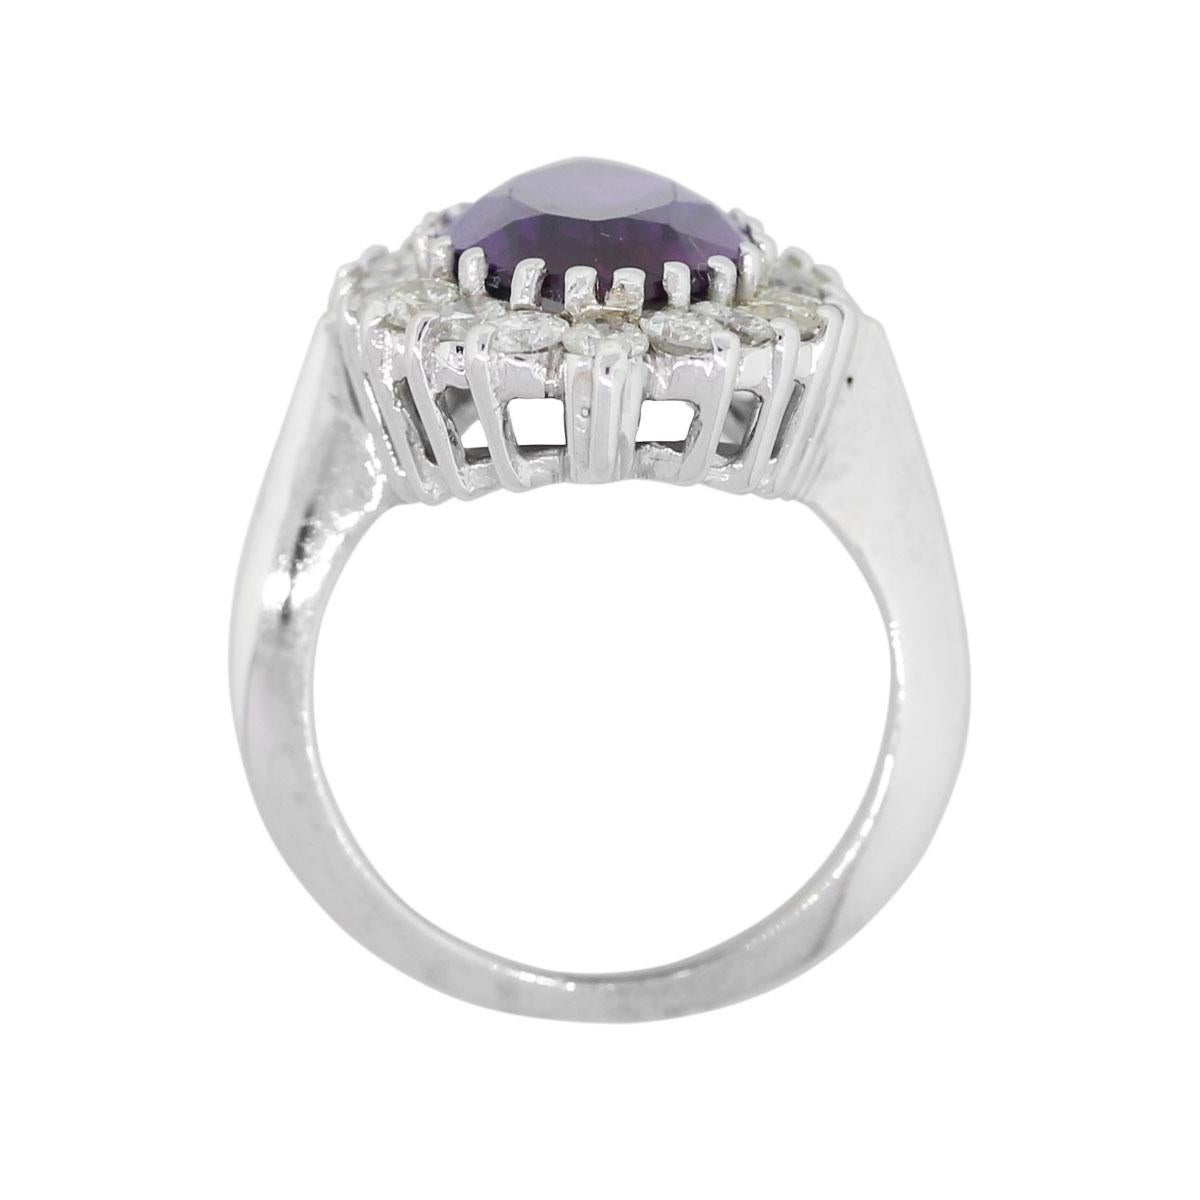 Material: 14k White Gold
Diamond Details: Approximately 1.40ctw of round brilliant diamonds. Diamonds are G/H in color and SI in clarity.
Gemstone Details: Marquise shape amethyst measuring approximately 0.69″ x 0.35″
Ring Measurements: 0.97″ x